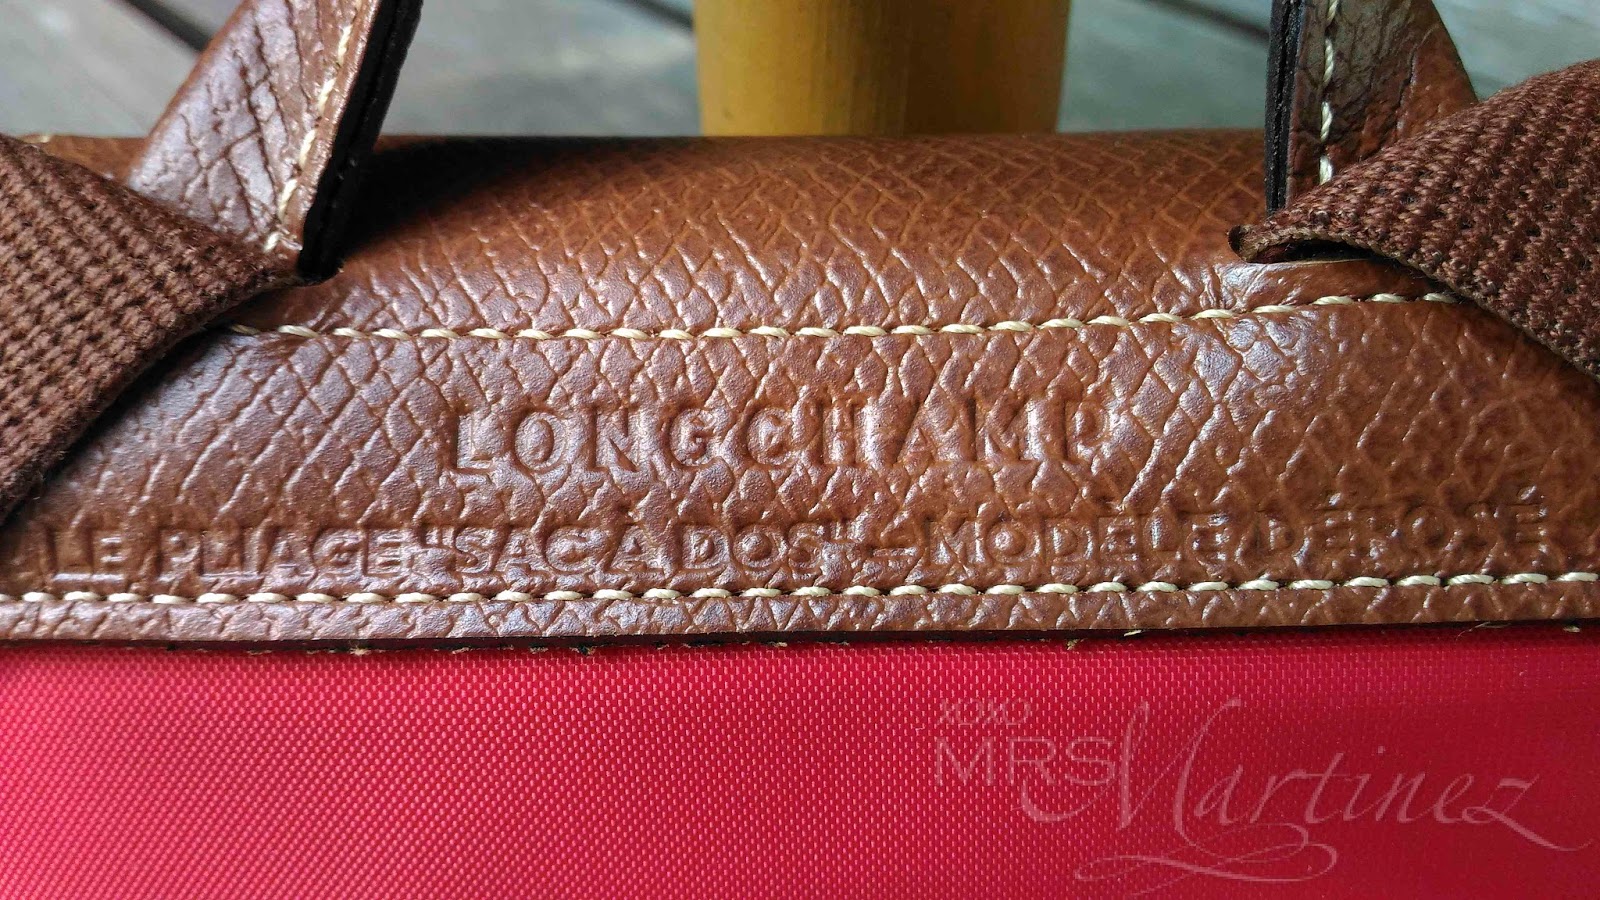 how to know if the longchamp bag is original